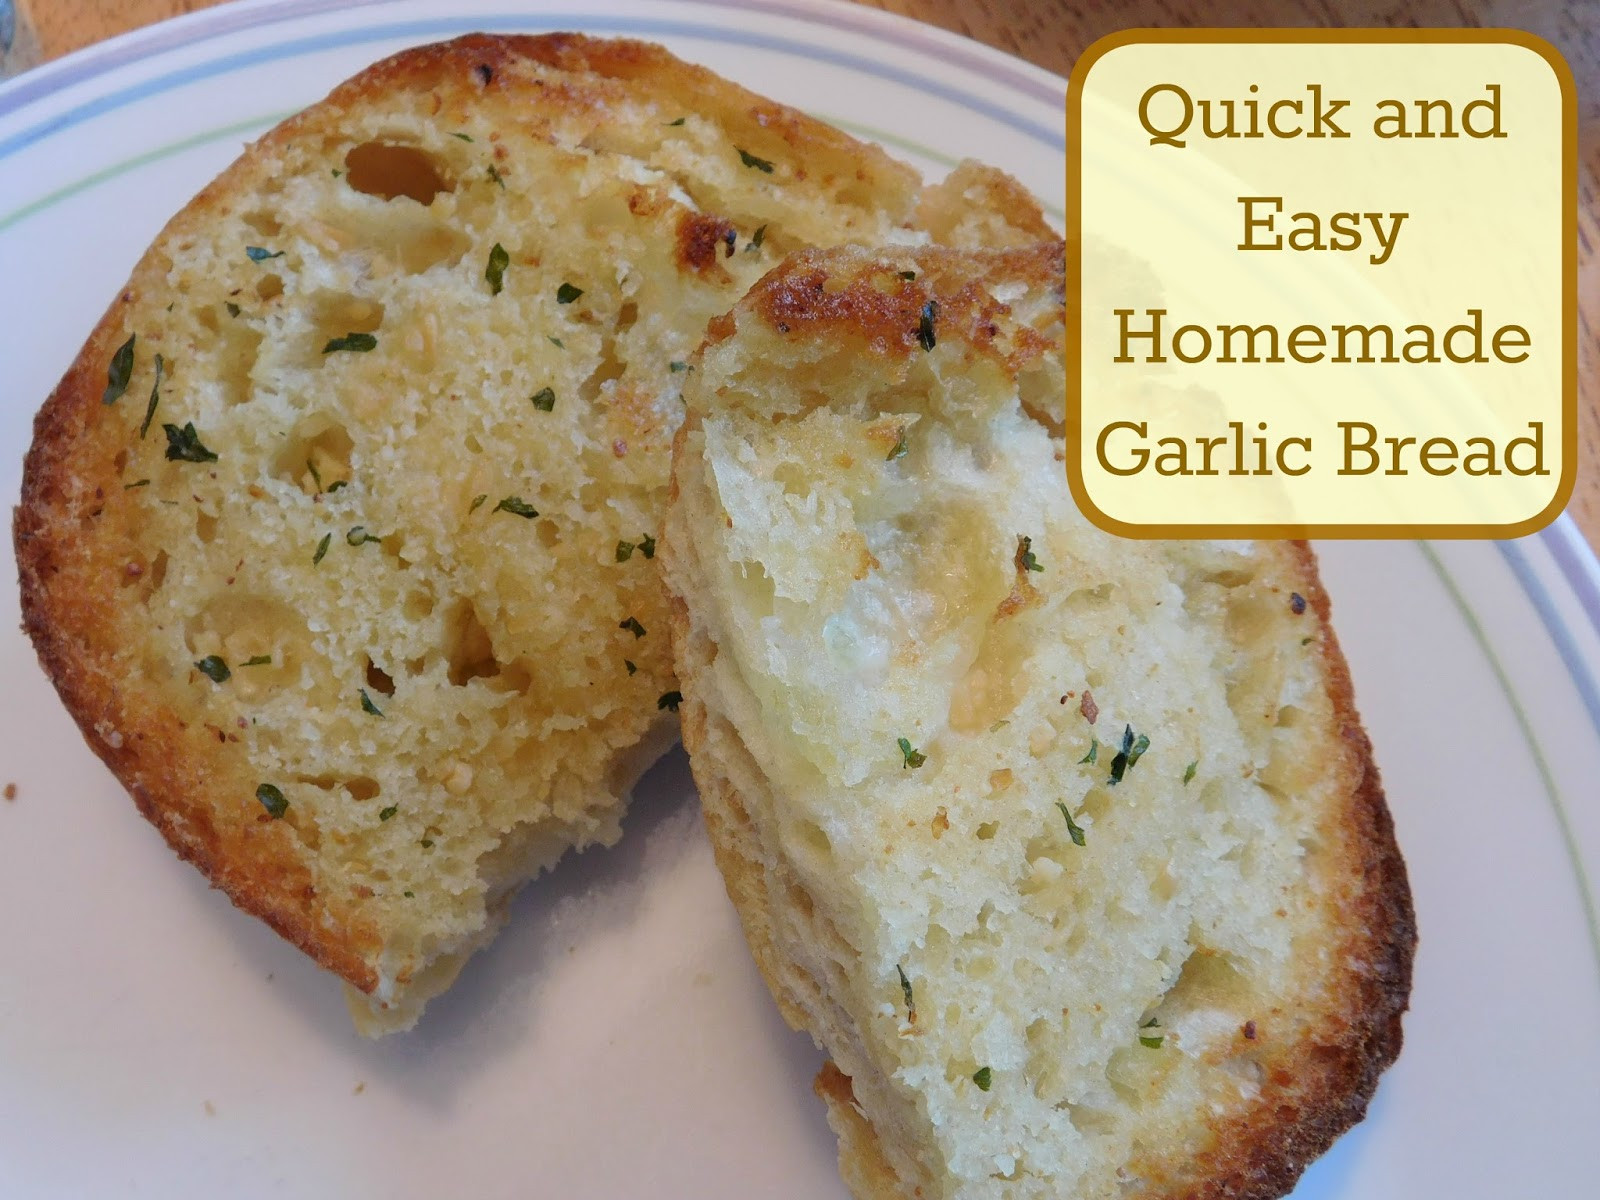 Quick And Easy Garlic Bread
 Quick and Easy Homemade Garlic Bread